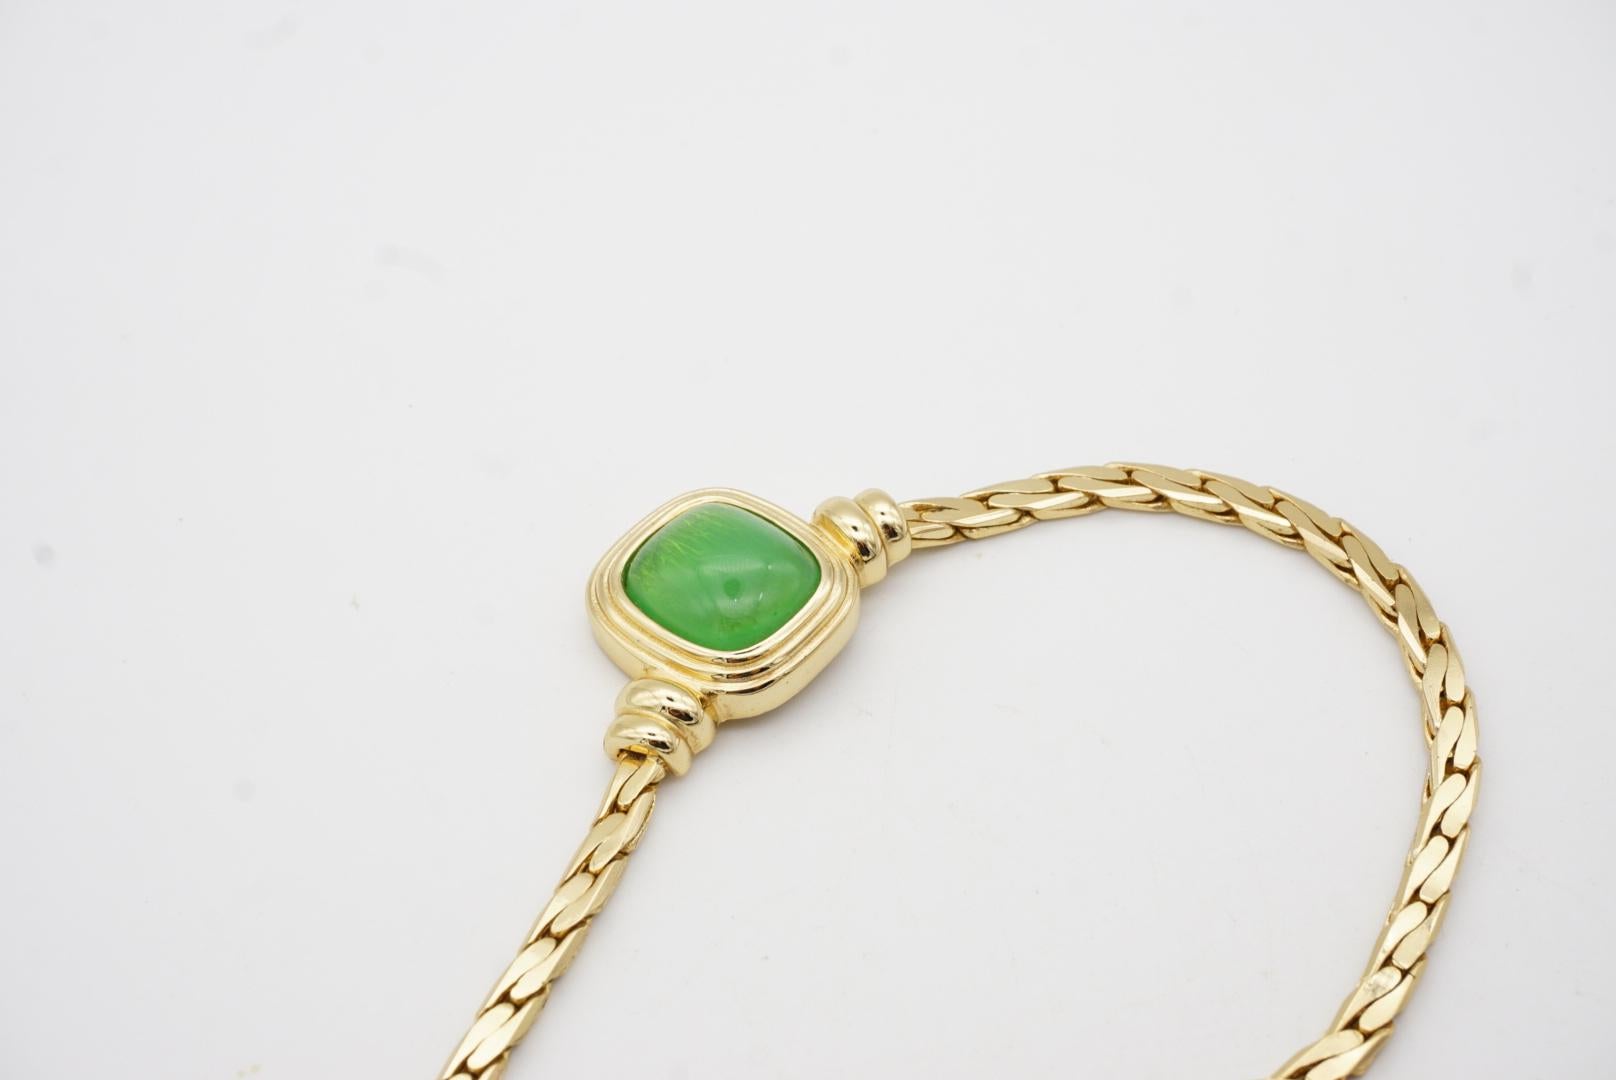 Christian Dior Vintage 1980s Emerald Green Rectangle Cabochon Pendant Necklace For Sale 4